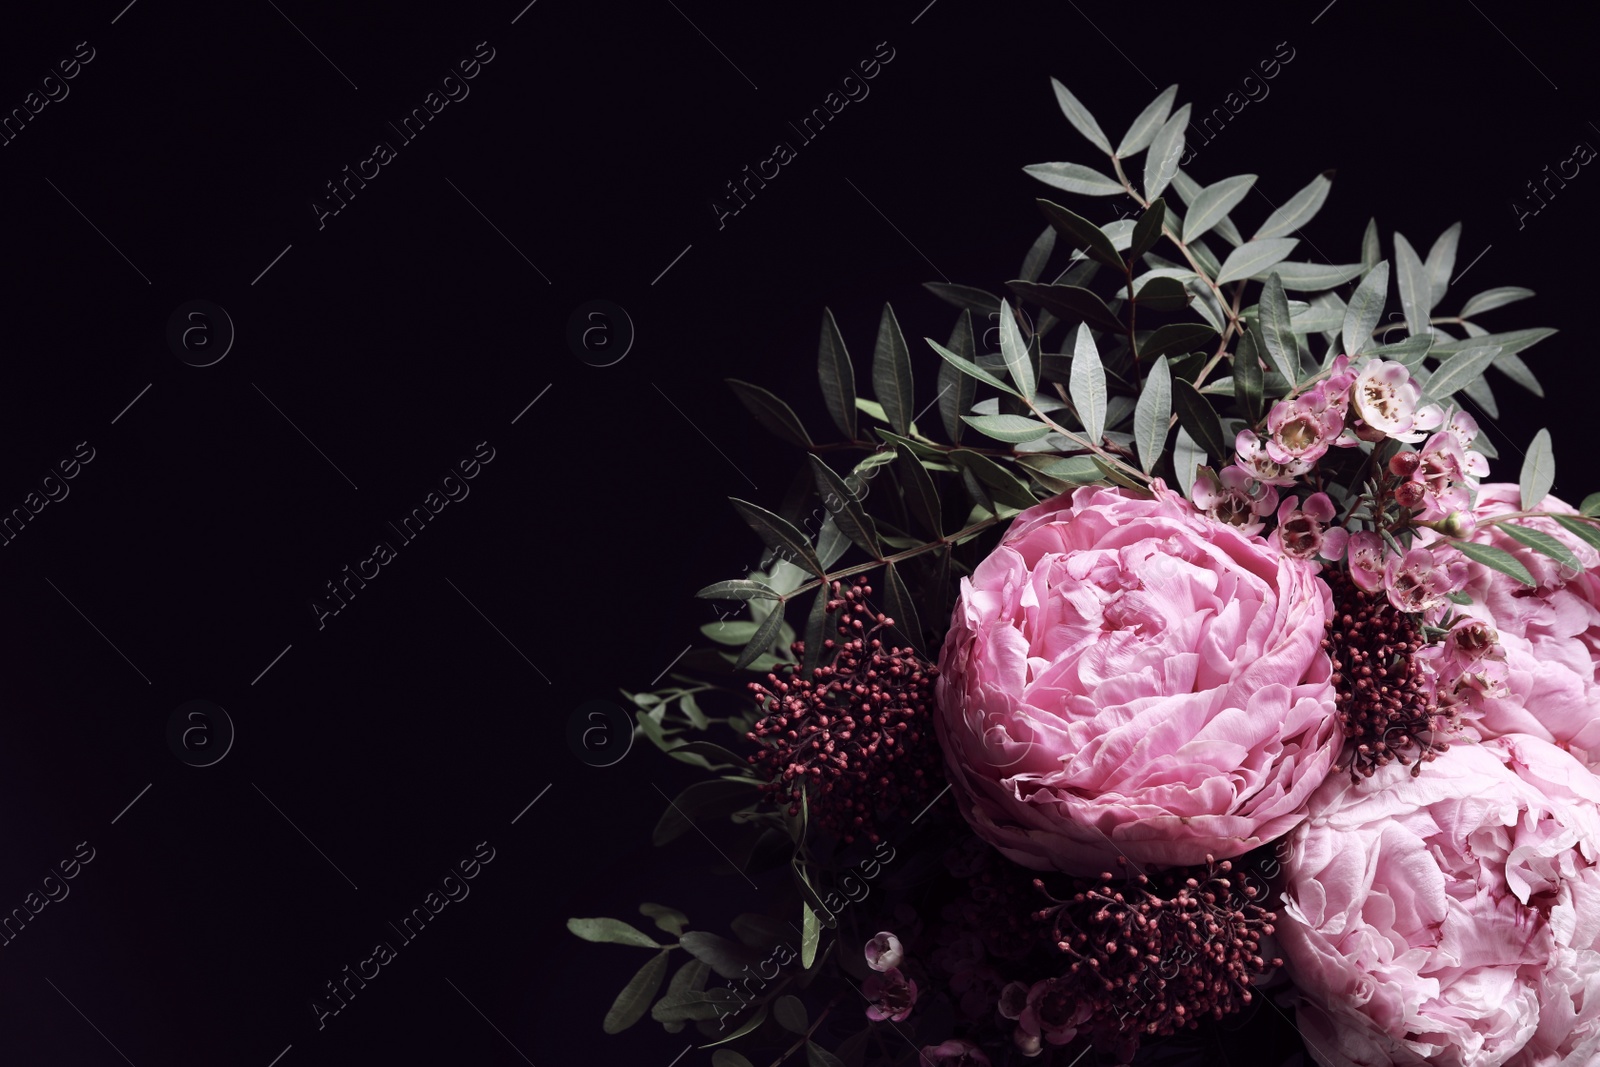 Photo of Bouquet of beautiful flowers on black background, space for text. Floral card design with dark vintage effect